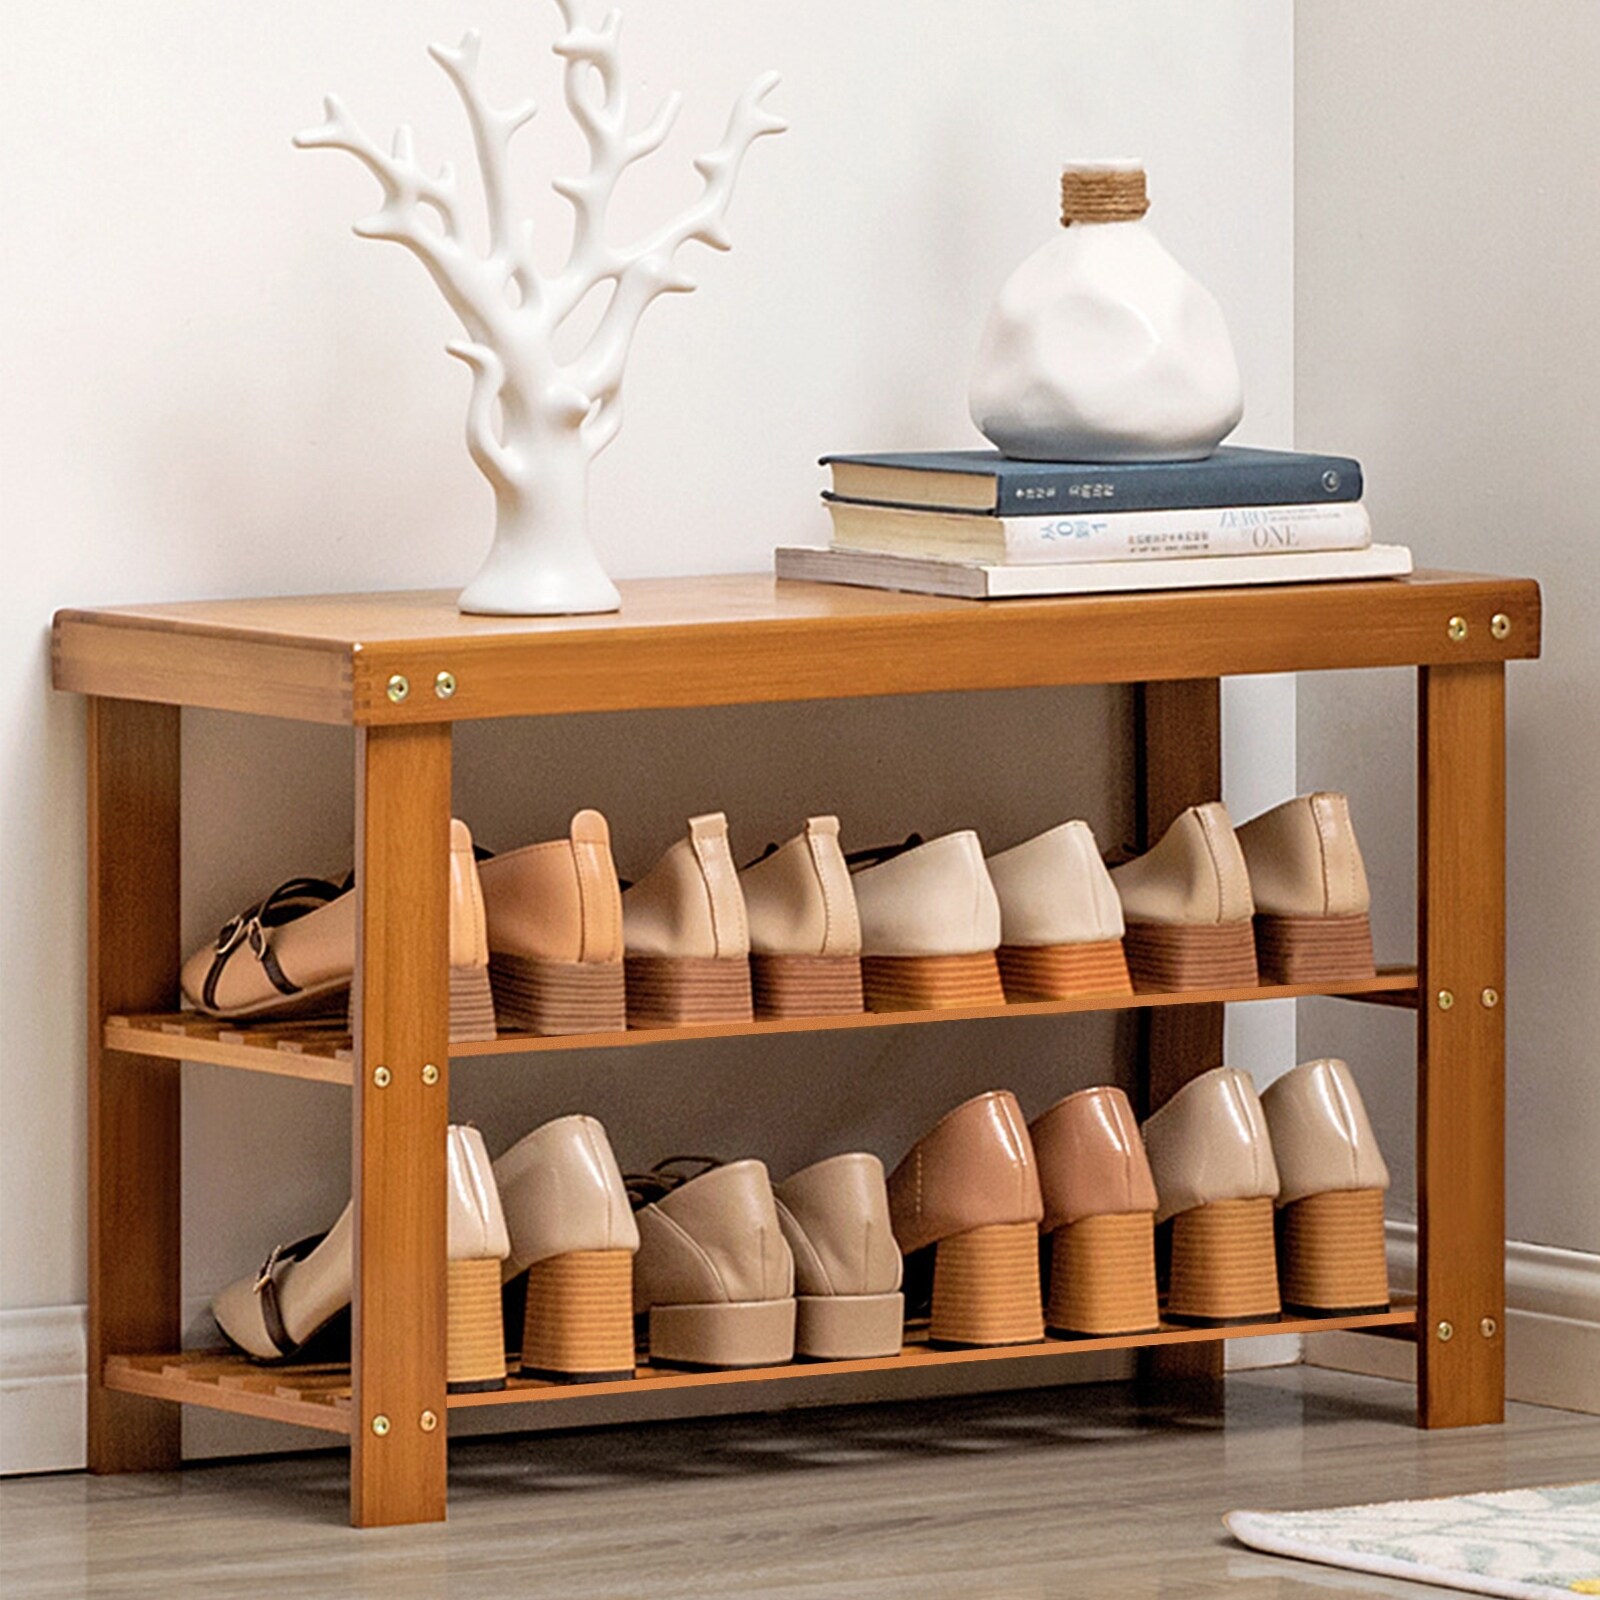 https://ak1.ostkcdn.com/images/products/is/images/direct/47576417e3acefe849bd74f8343be5cb71c6a14d/3-Tier-Bamboo-Shoe-Rack-Bench-Storage-Organizer-Entryway-Storage-Shelf.jpg